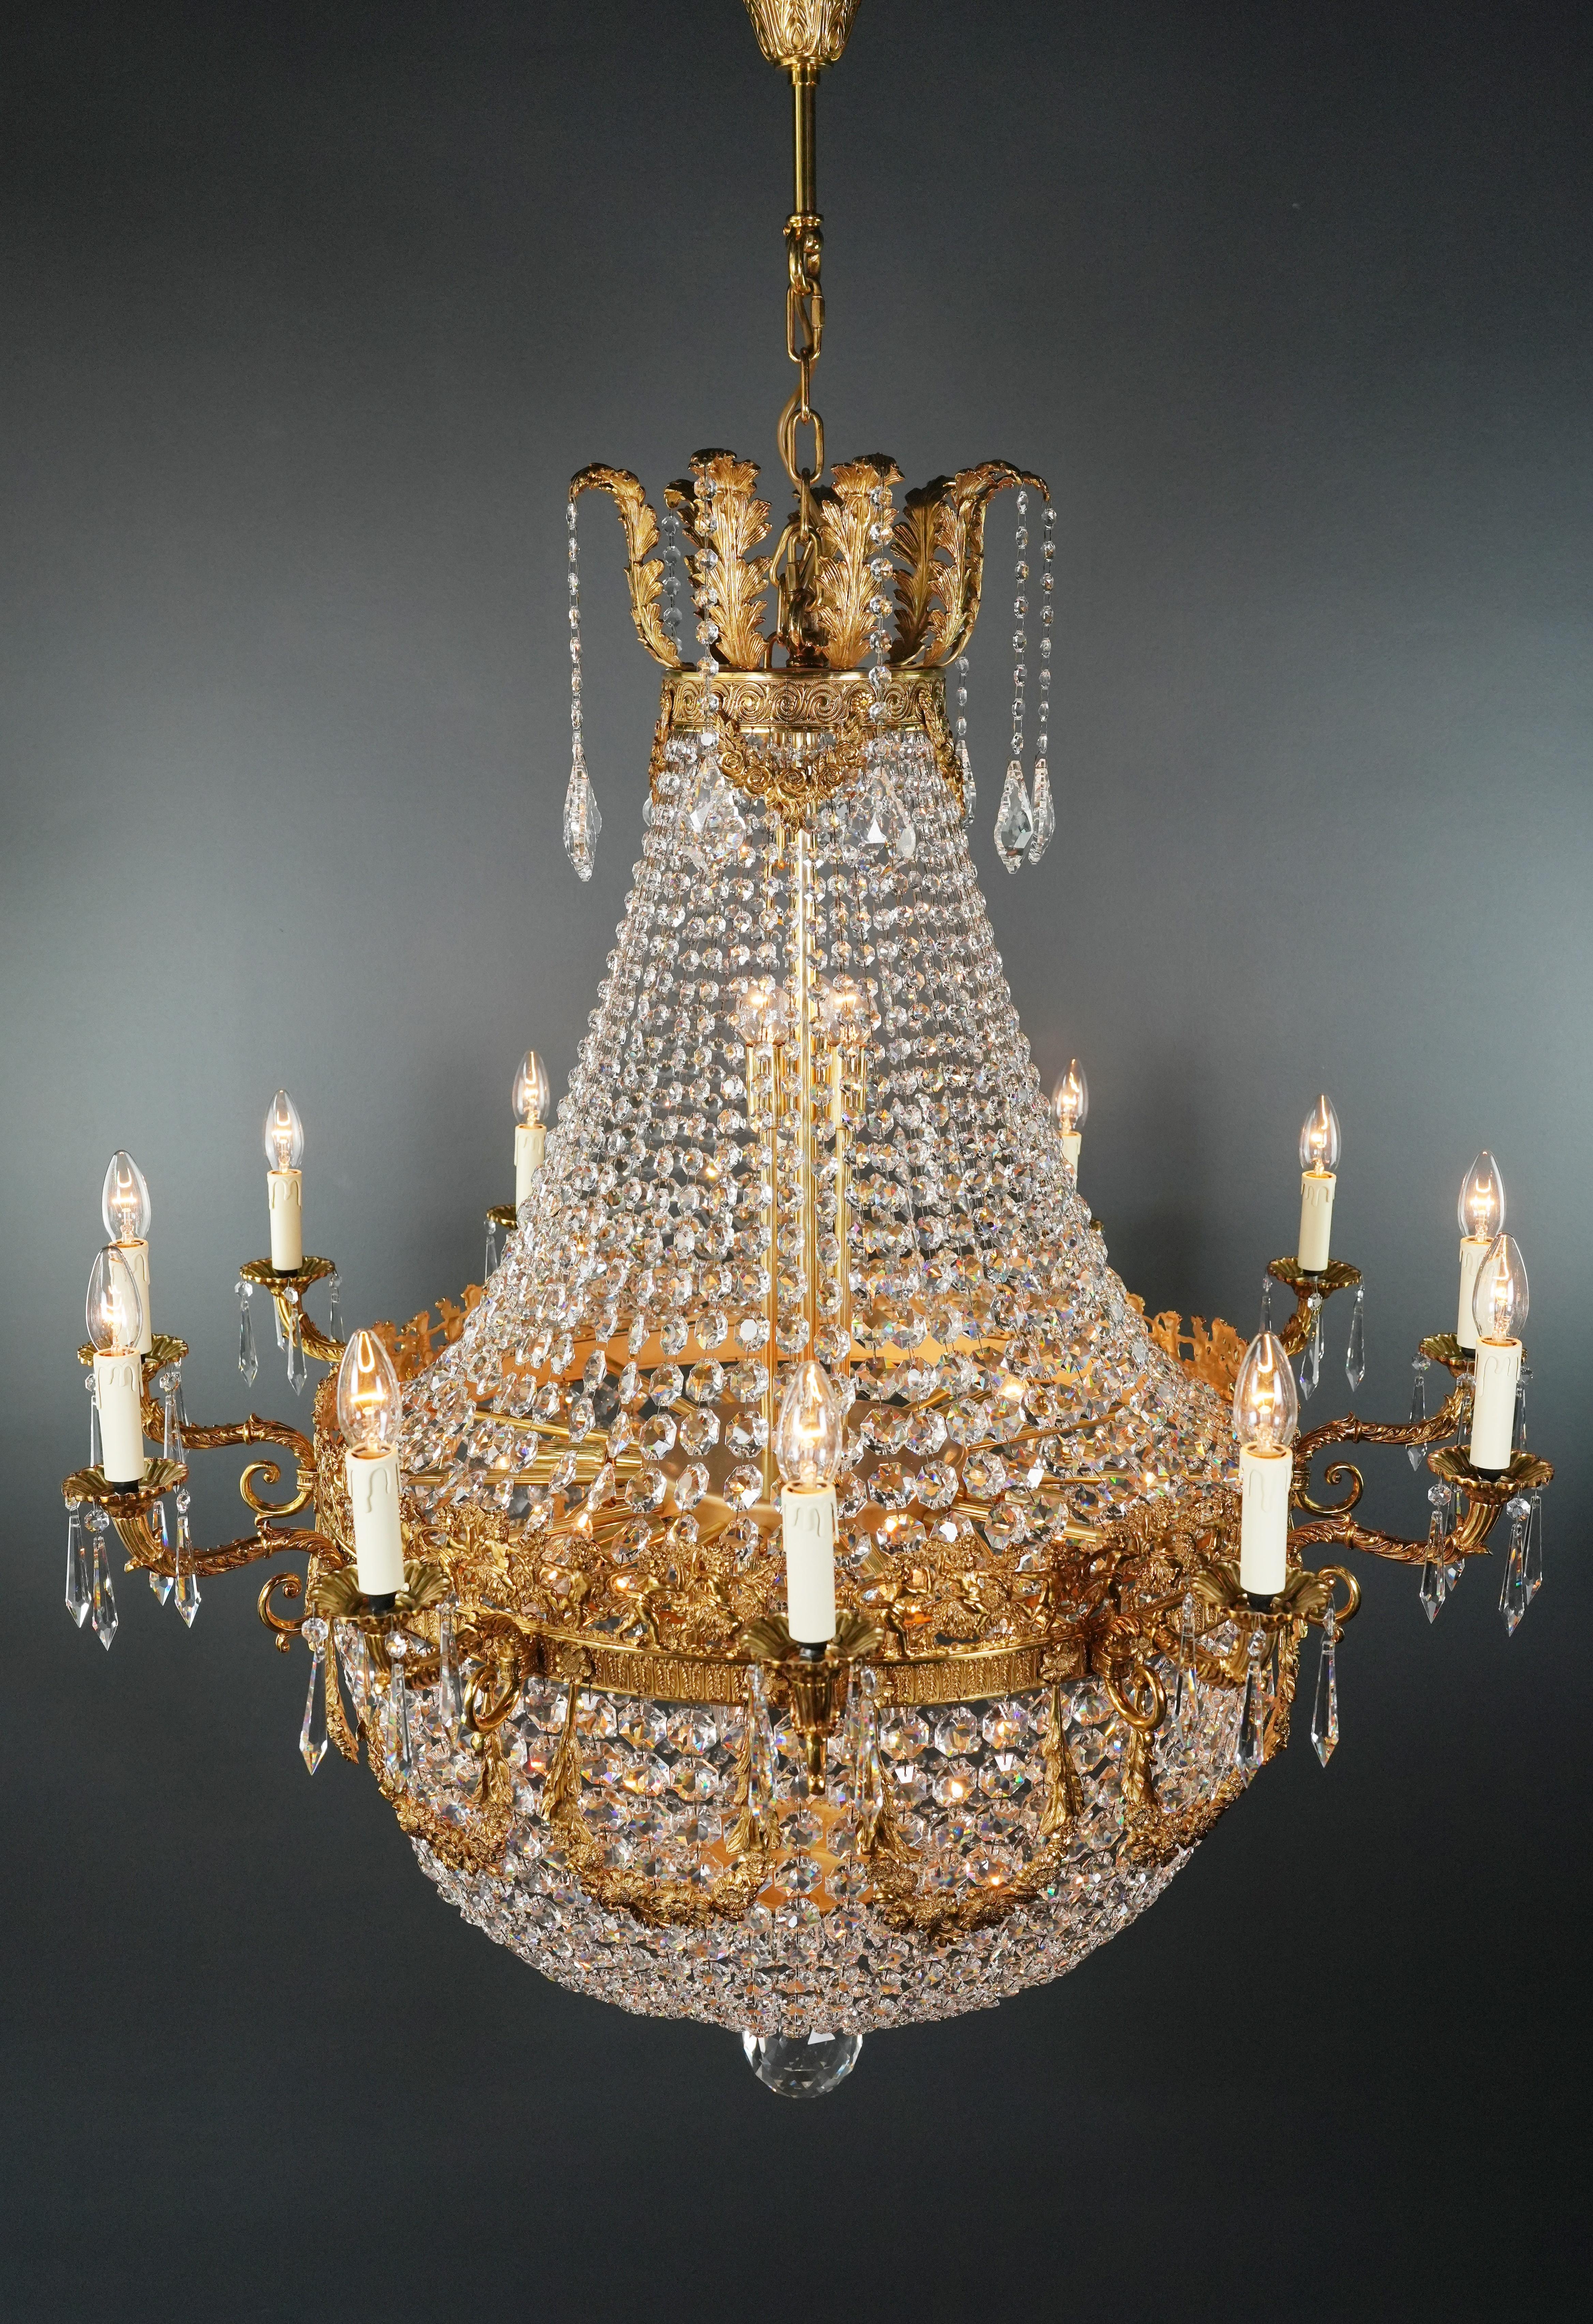 Wreat Brass Basket Empire Sac a Pearl Chandelier Crystal and Antique Gold In New Condition For Sale In Berlin, DE